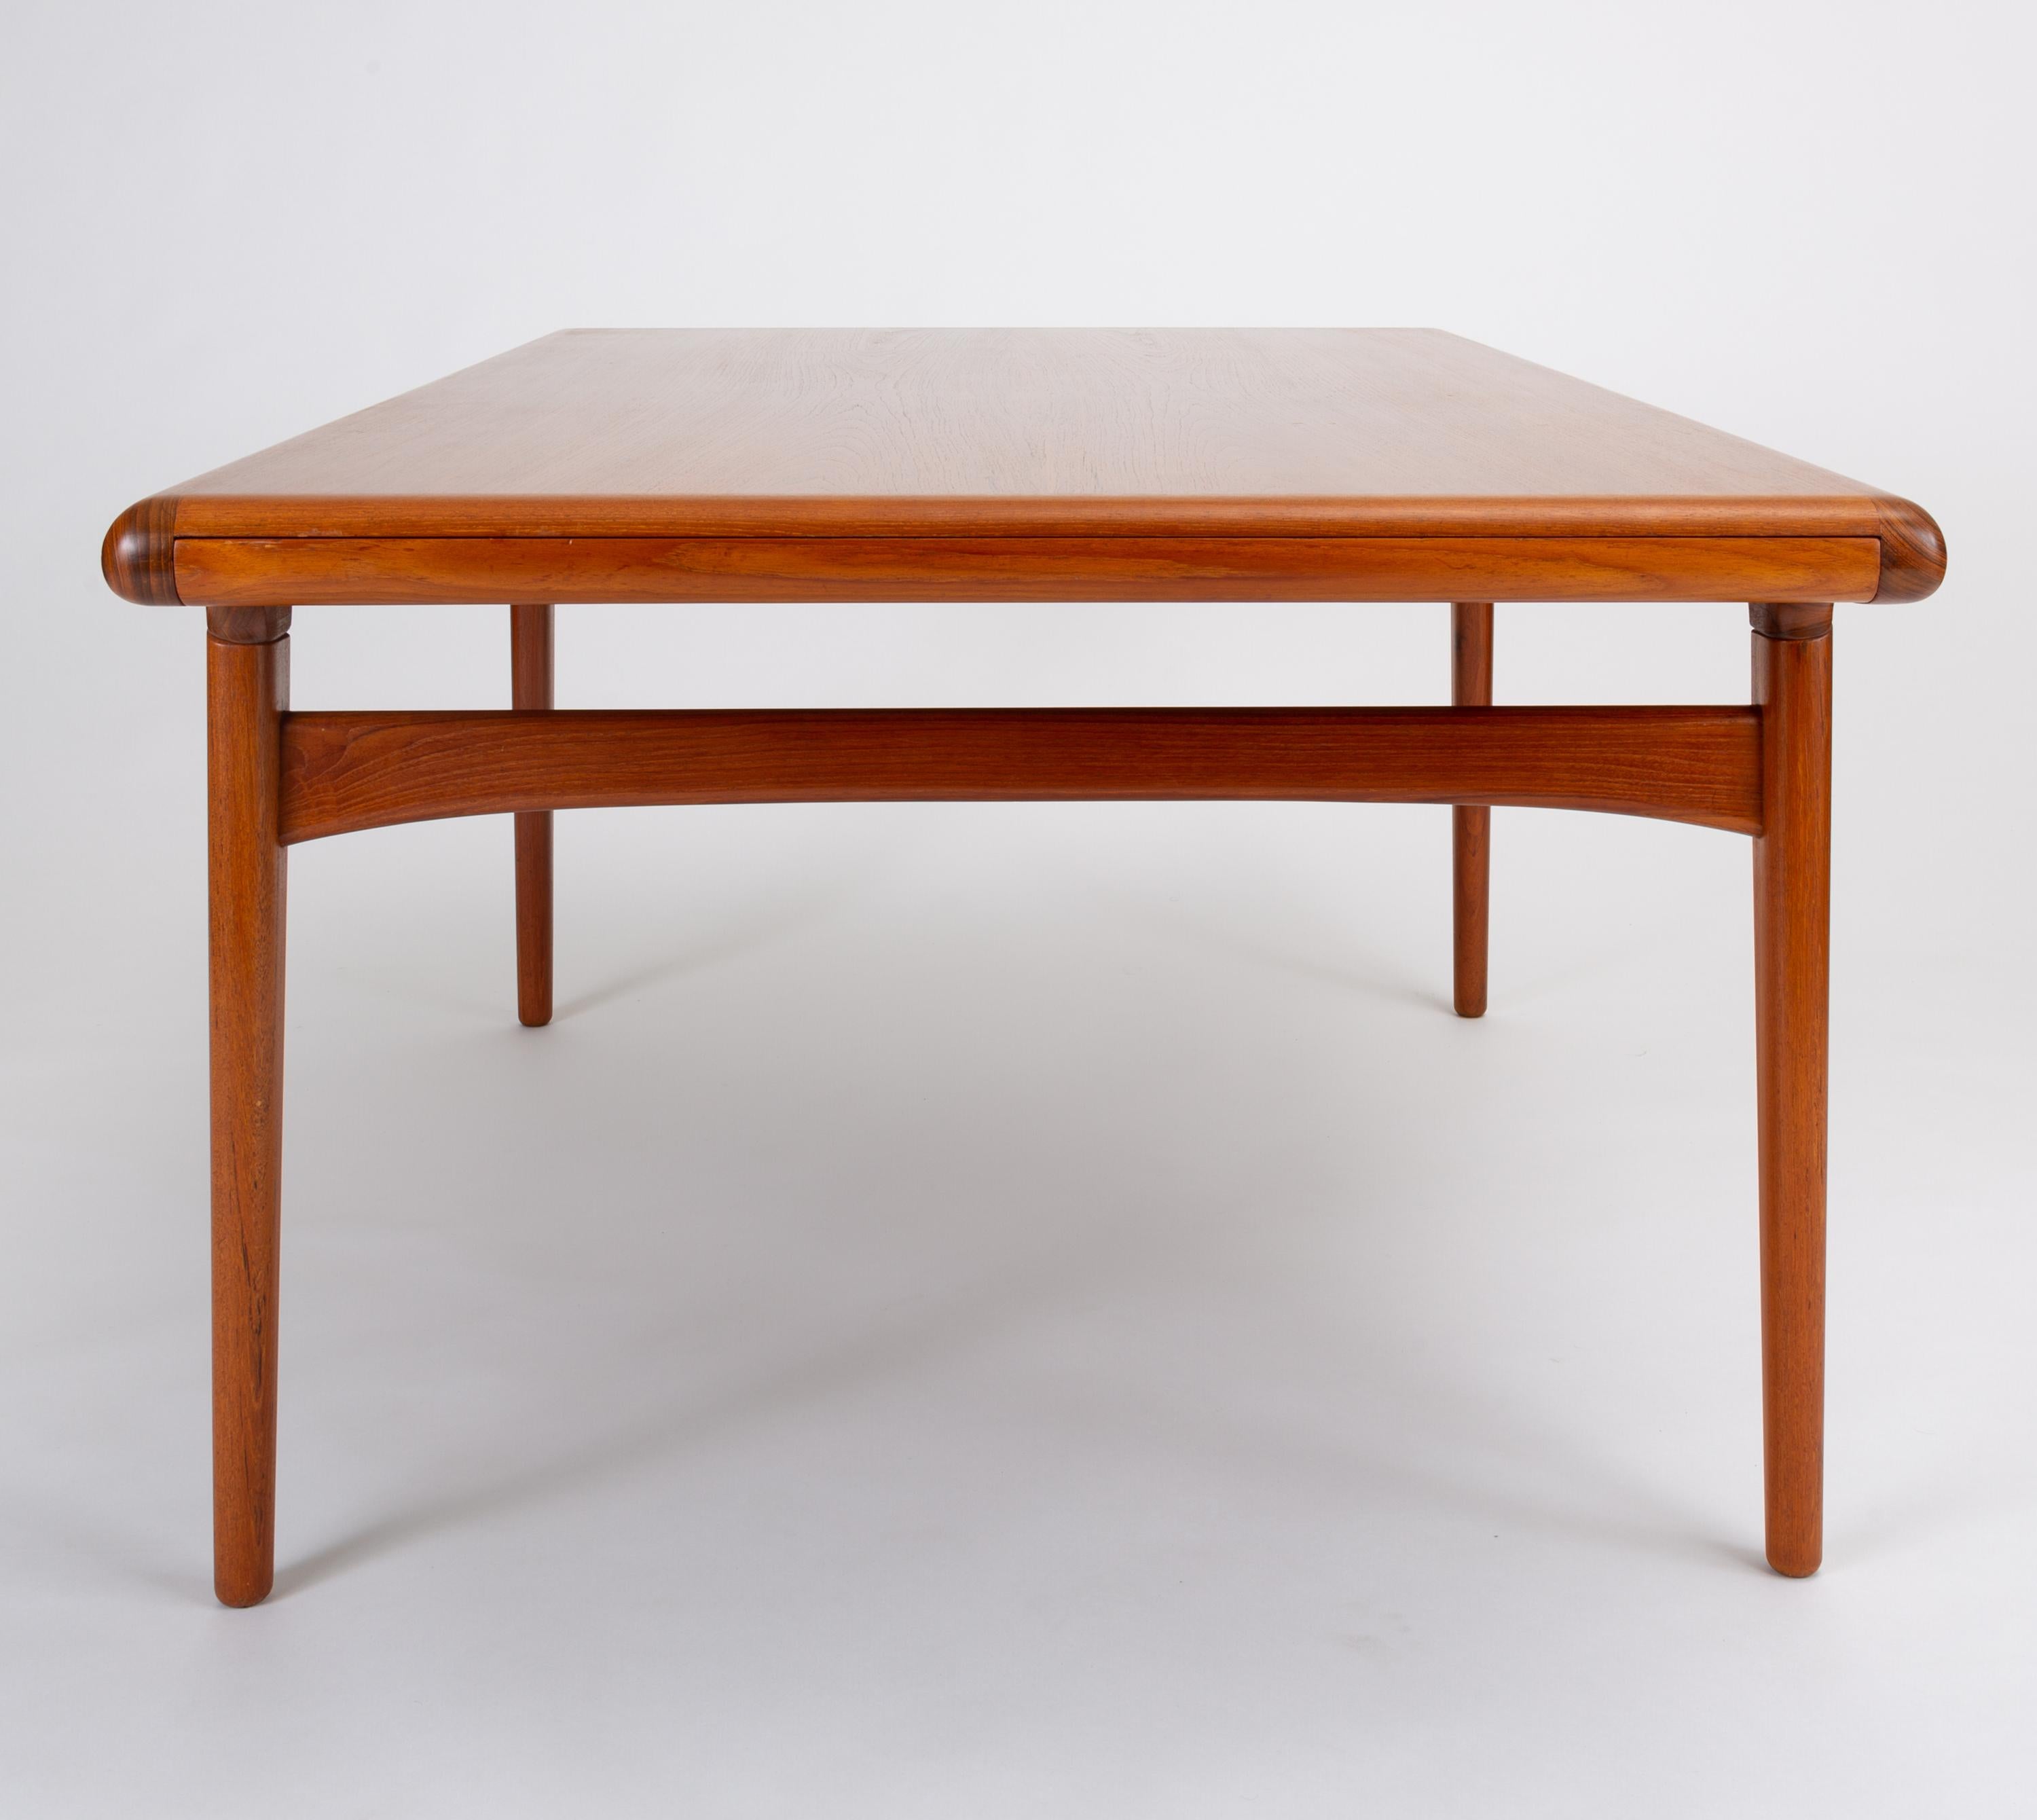 Danish Modern Dining Table with Leaves by Johannes Andersen for Uldum 1